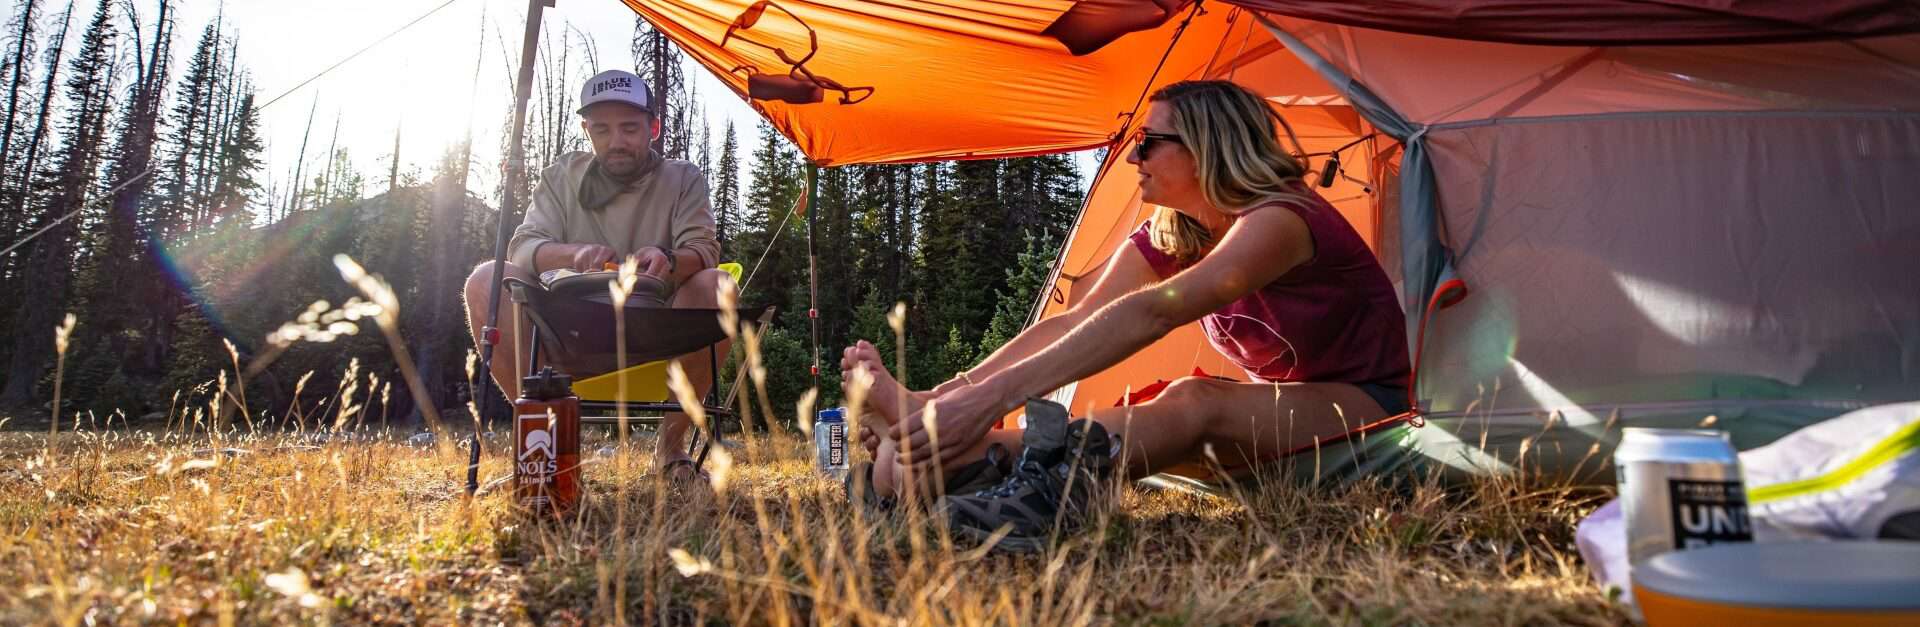 Two campers sat by their Big Agnes Copper Spur backpacking tent